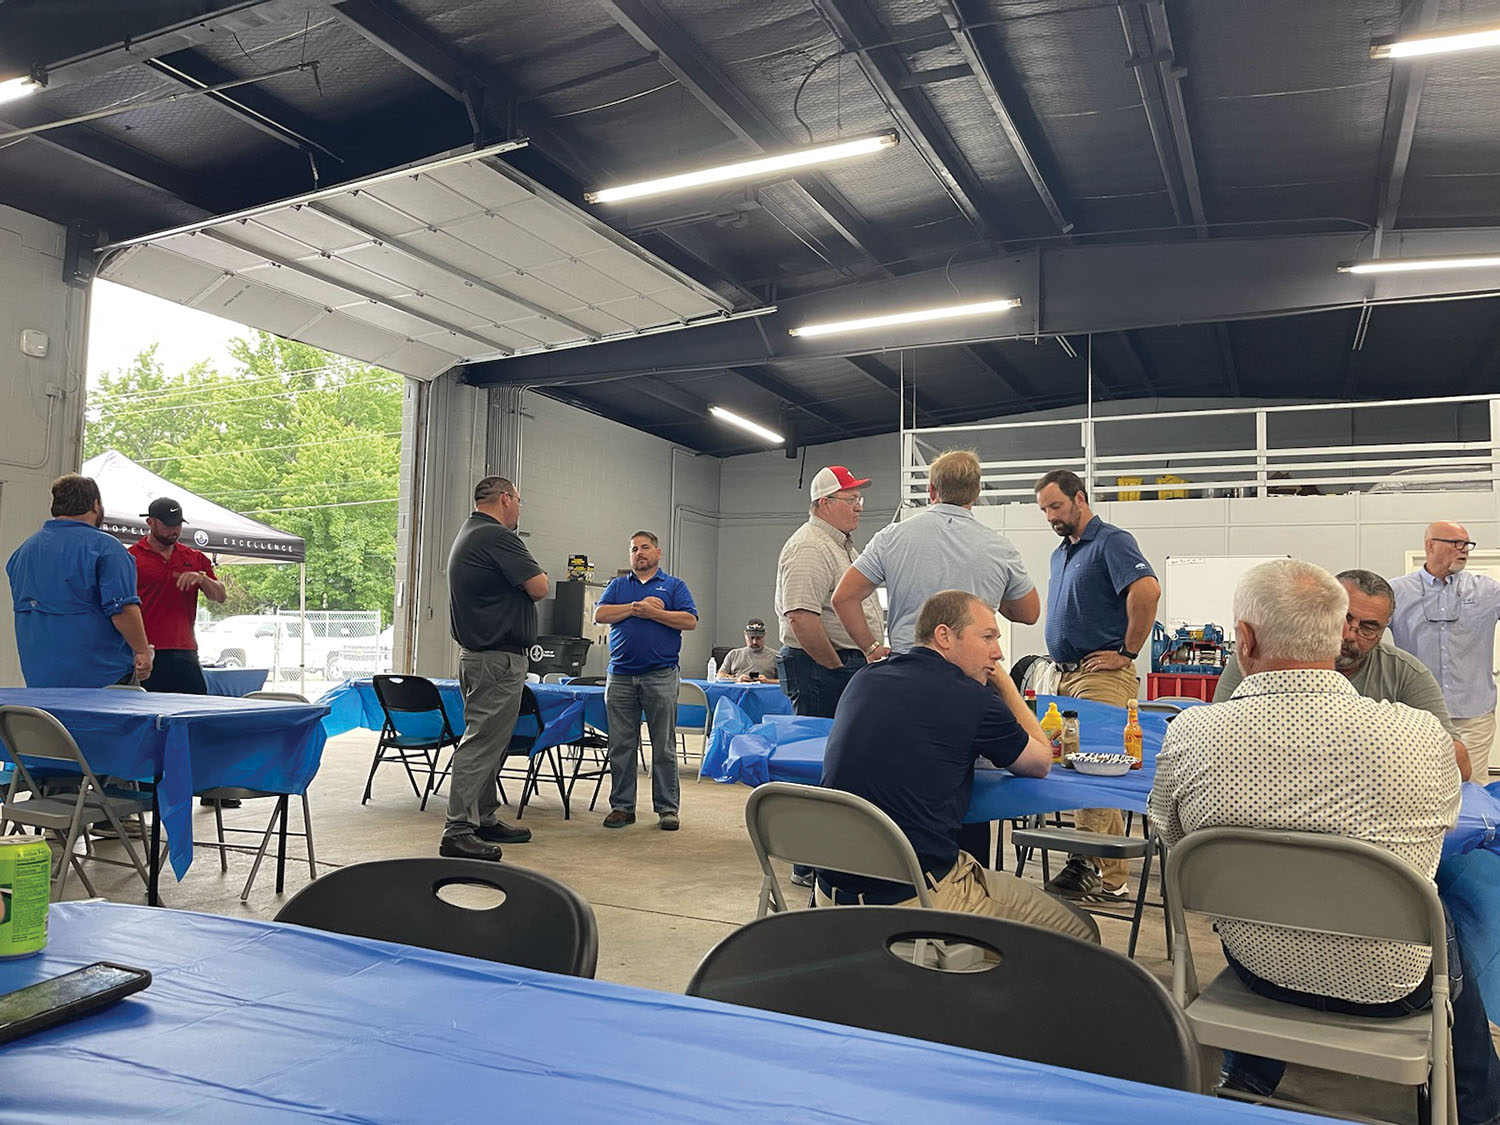 Karl Senner opened a new office in May on Cairo Road in Paducah, hosting an open house as part of the festivities. (Photo courtesy of Karl Senner)